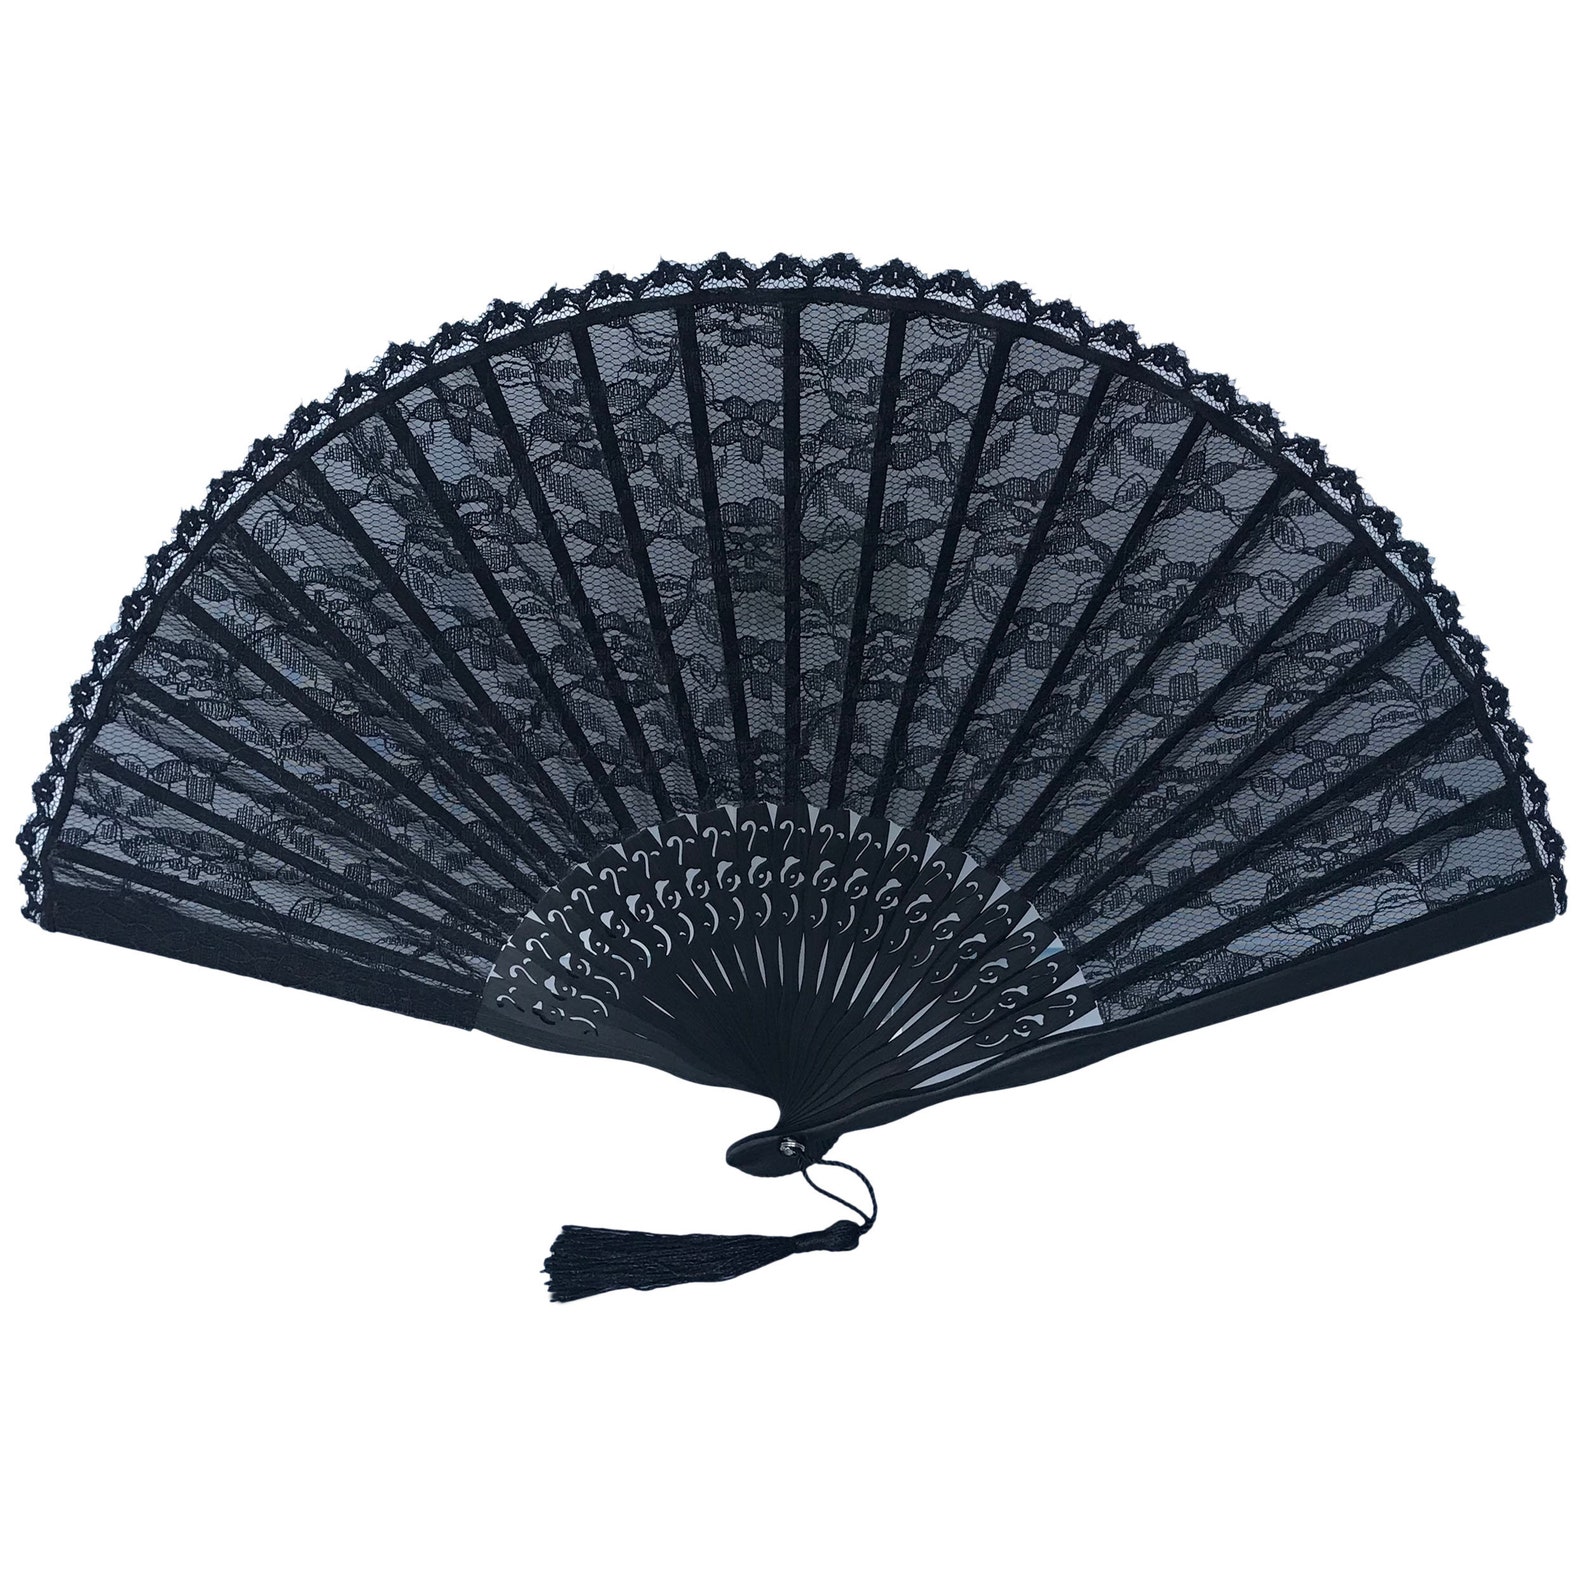 Vintage Black Lace Hand Fan Bamboo Ribs Folding Fans With a - Etsy